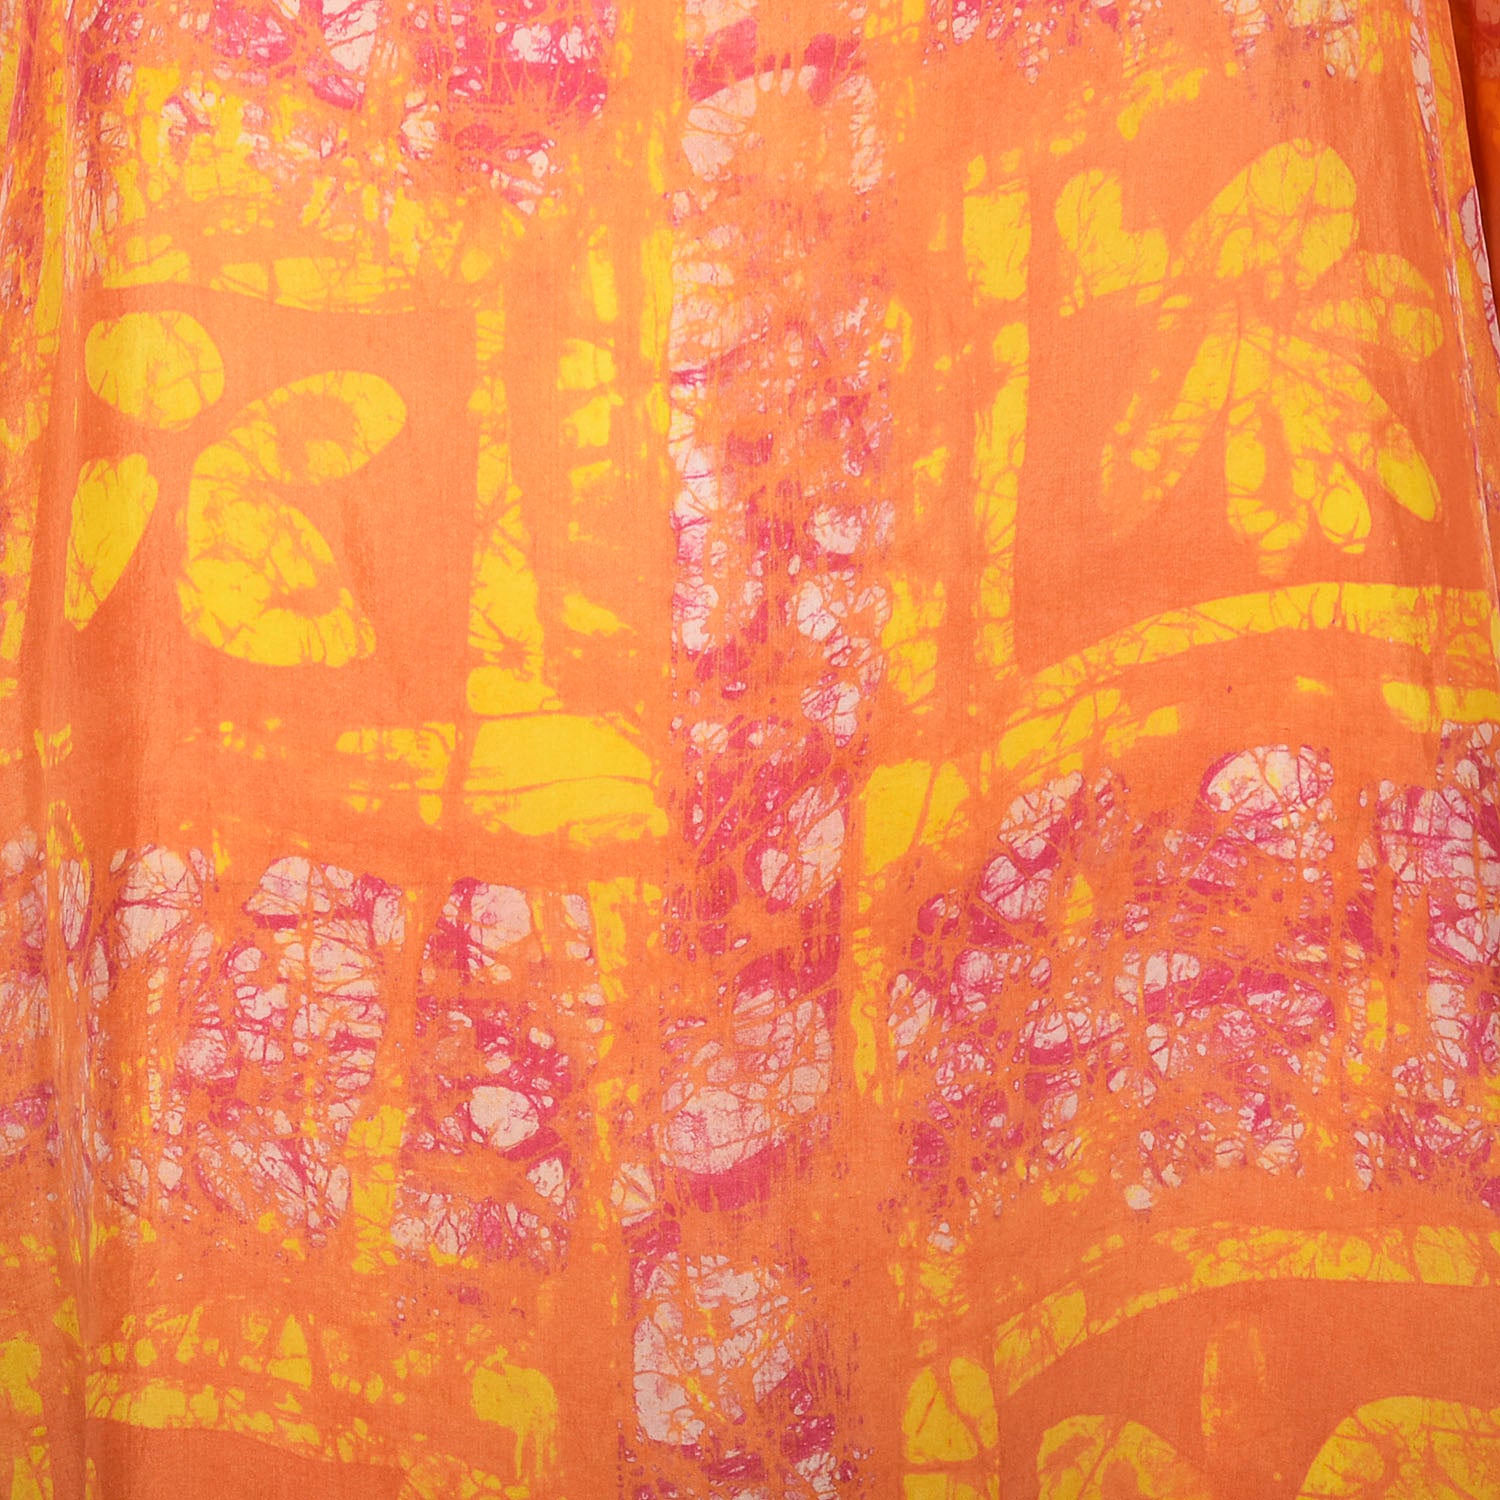 One Size 1970s Orange Yellow Abstract Batik Style Psychedelic Print Dress